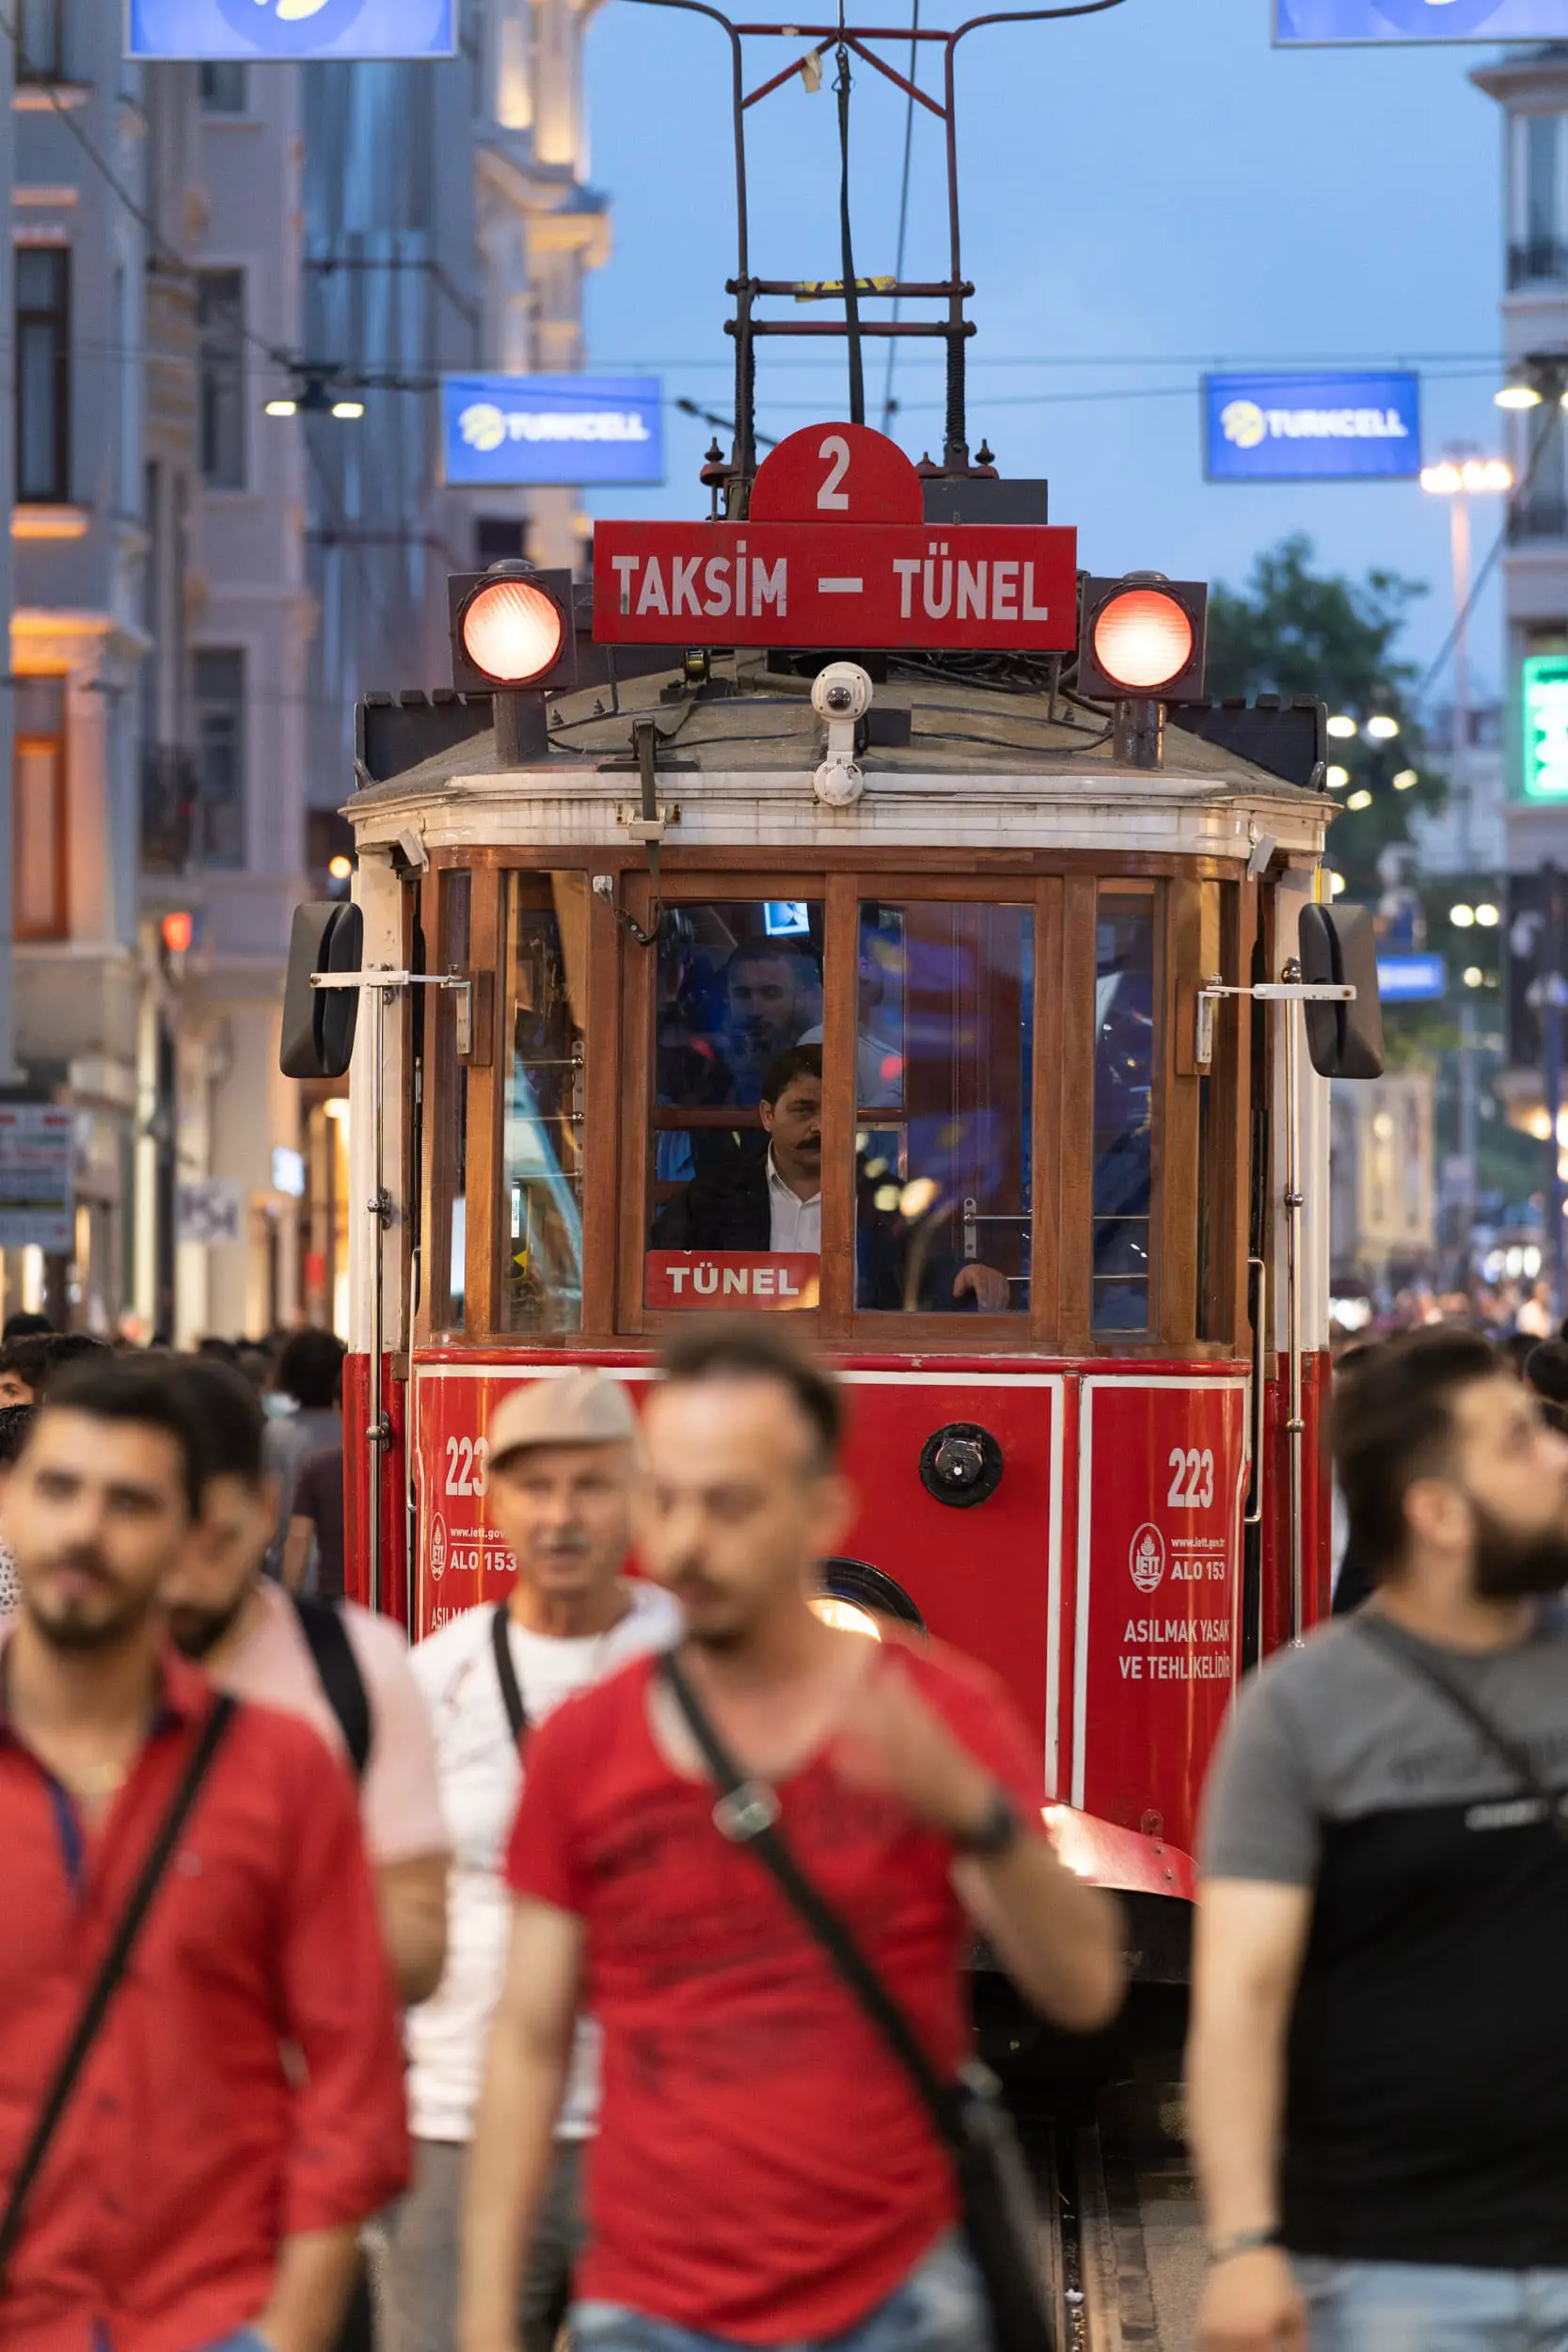 red tram Istanbul